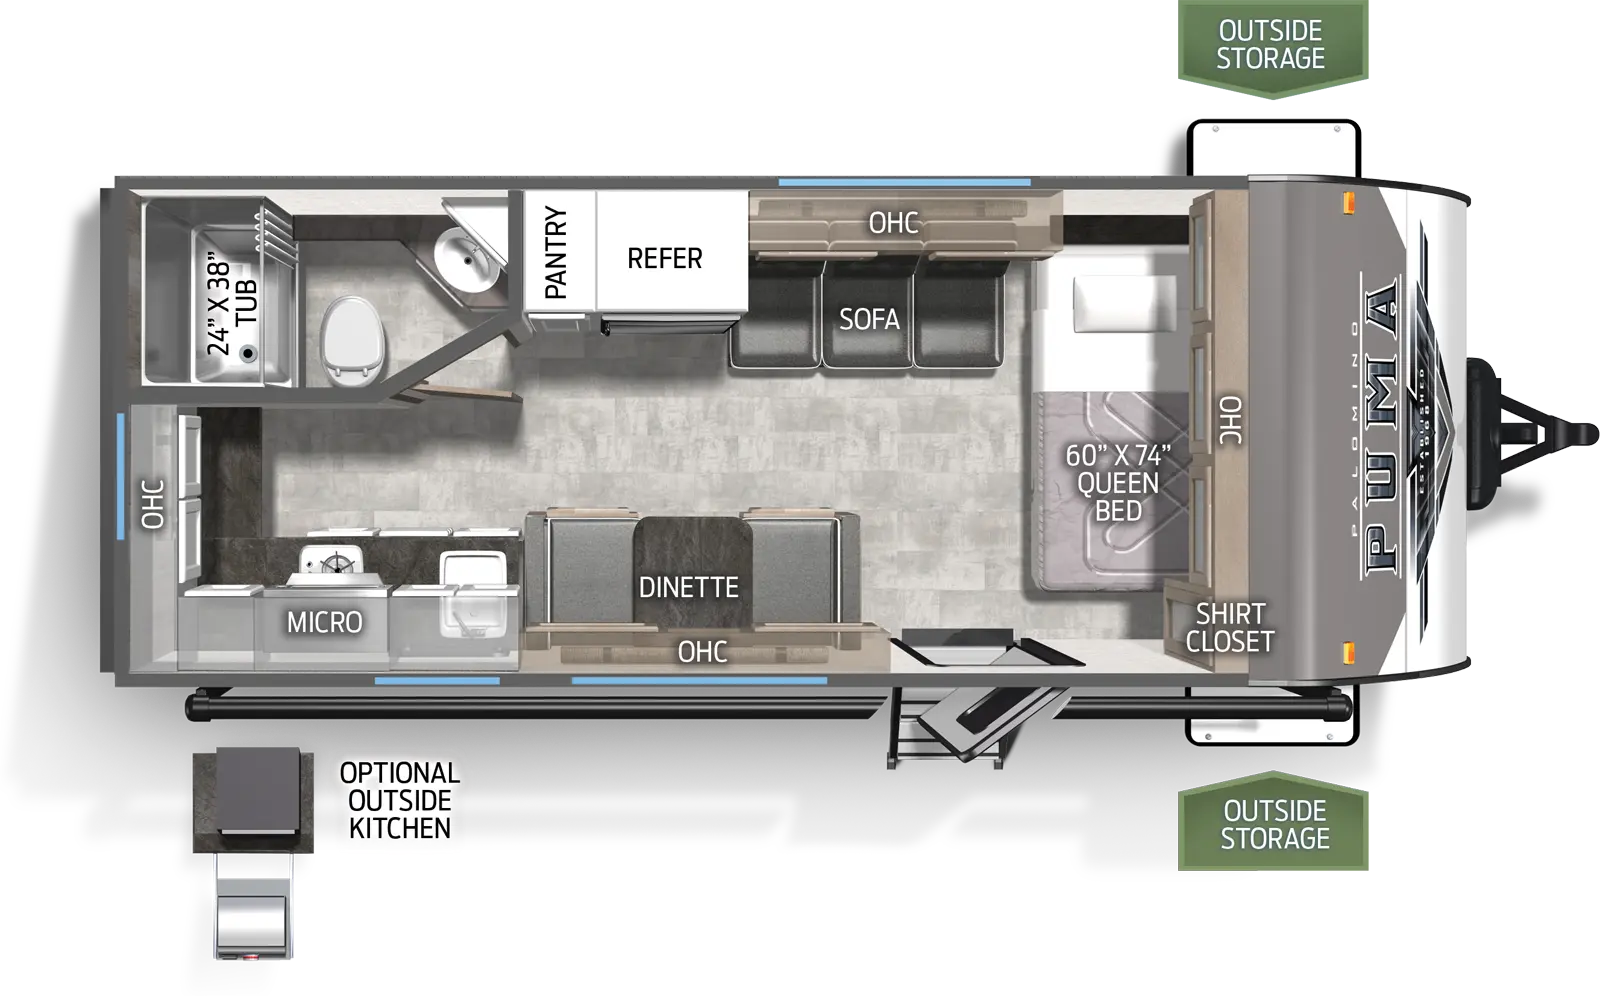 The 18RKX has zero slideouts and one entry. Exterior features front storage, awning, and optional outside kitchen. Interior layout front to back: side facing queen bed with overhead cabinet and shirt closet; off-door side sofa with overhead cabinet, refrigerator, and pantry; door side entry, dinette and overhead cabinet; rear off-door side full bathroom; rear door side kitchen with sink, overhead cabinet, microwave, cooktop, and countertop that wraps to the rear with more overhead cabinet space.